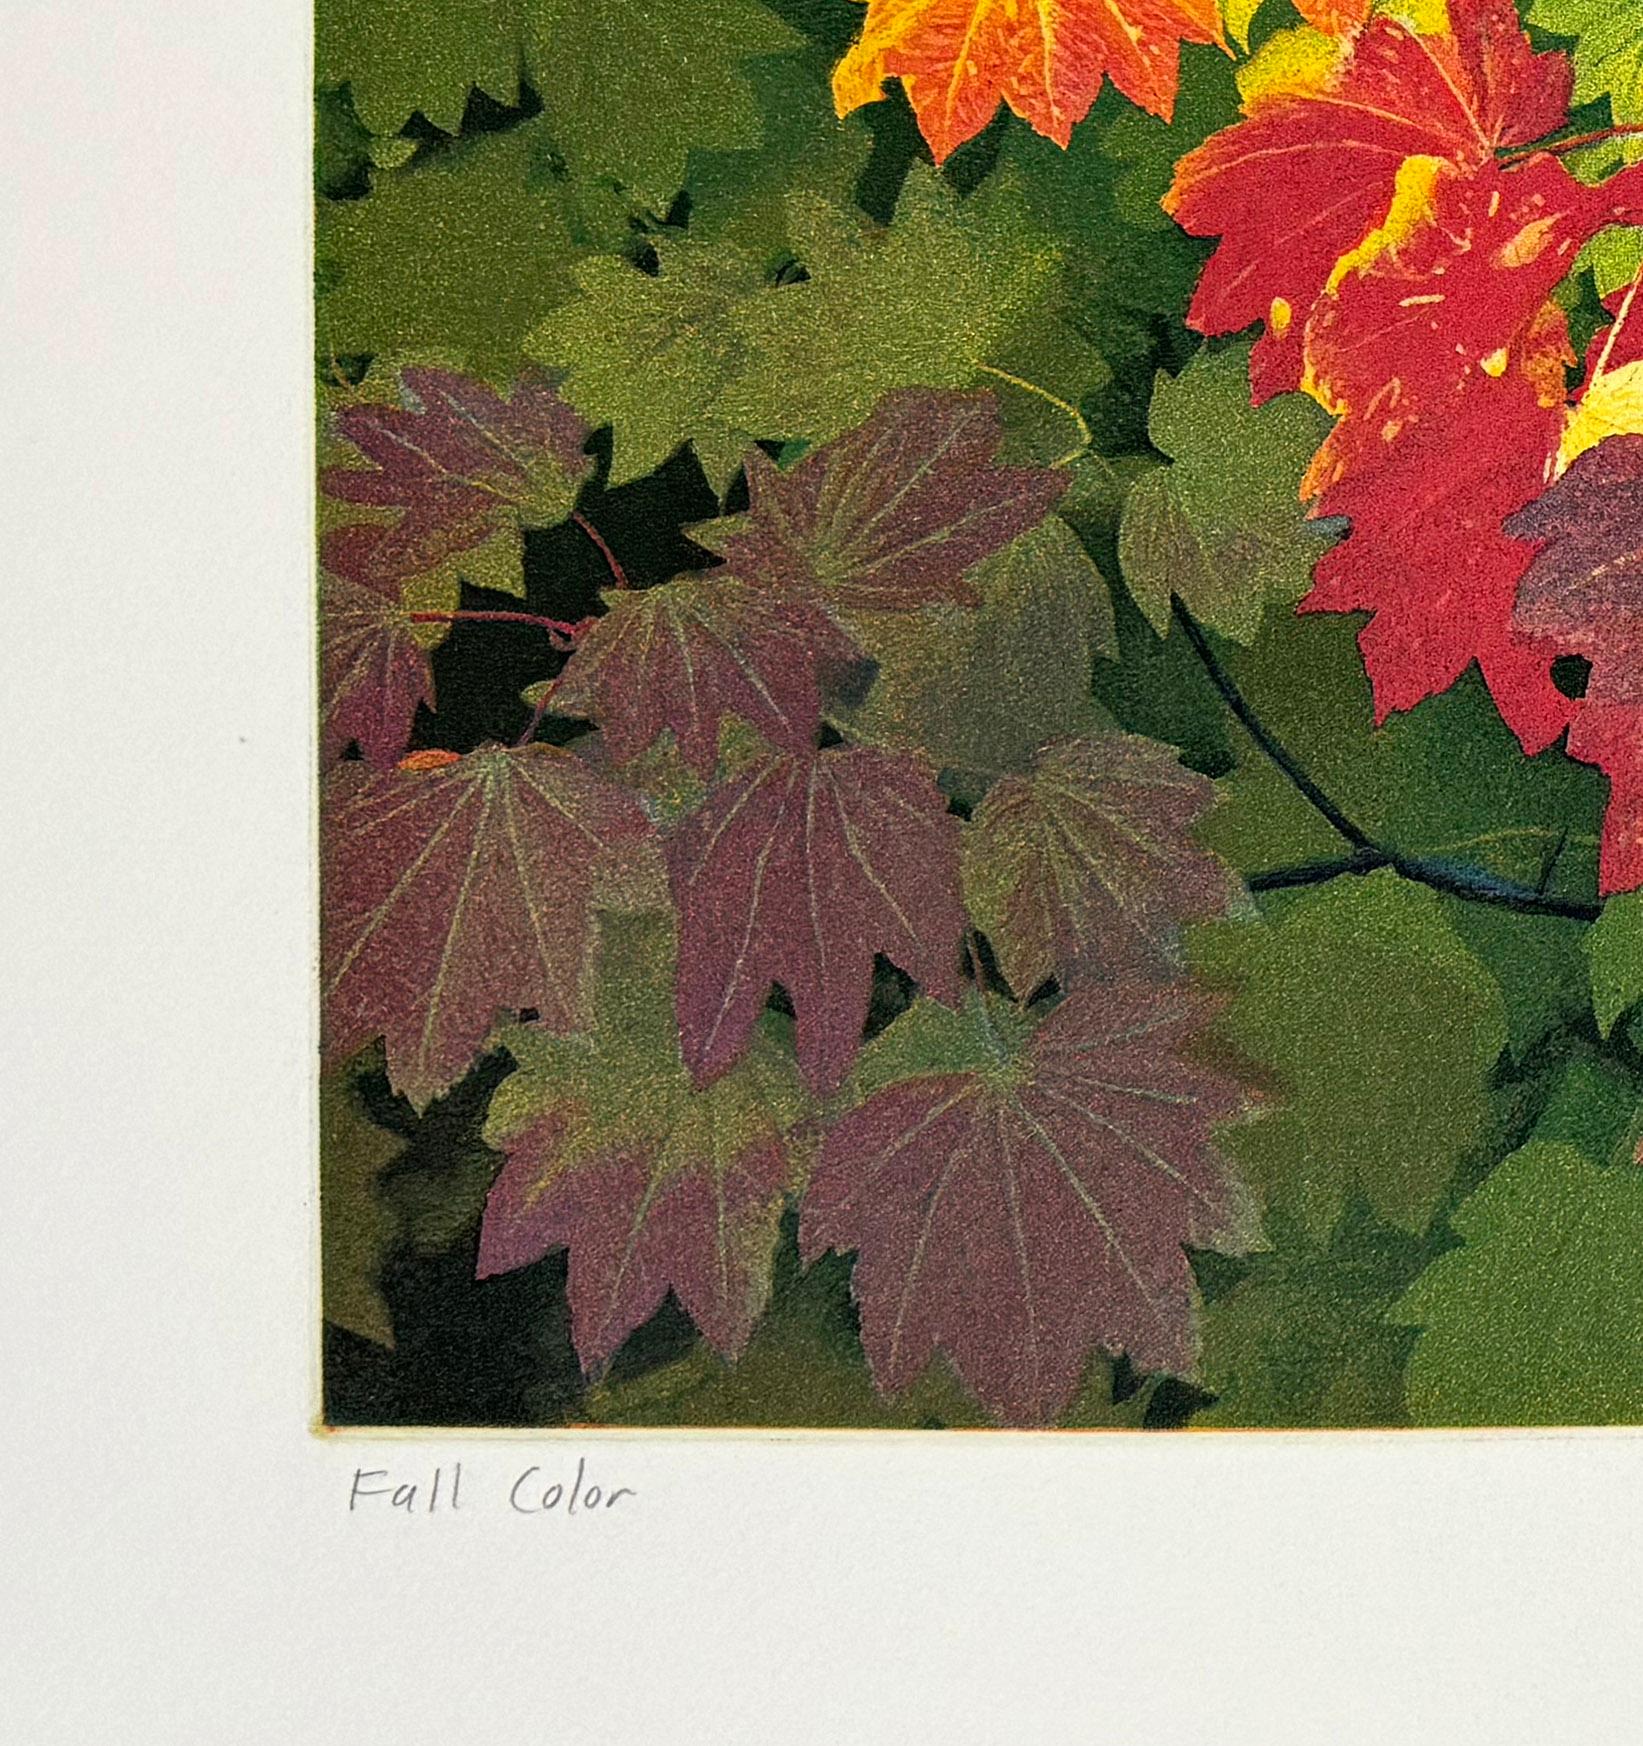 Fall Colors - Contemporary Print by Stephen McMillan